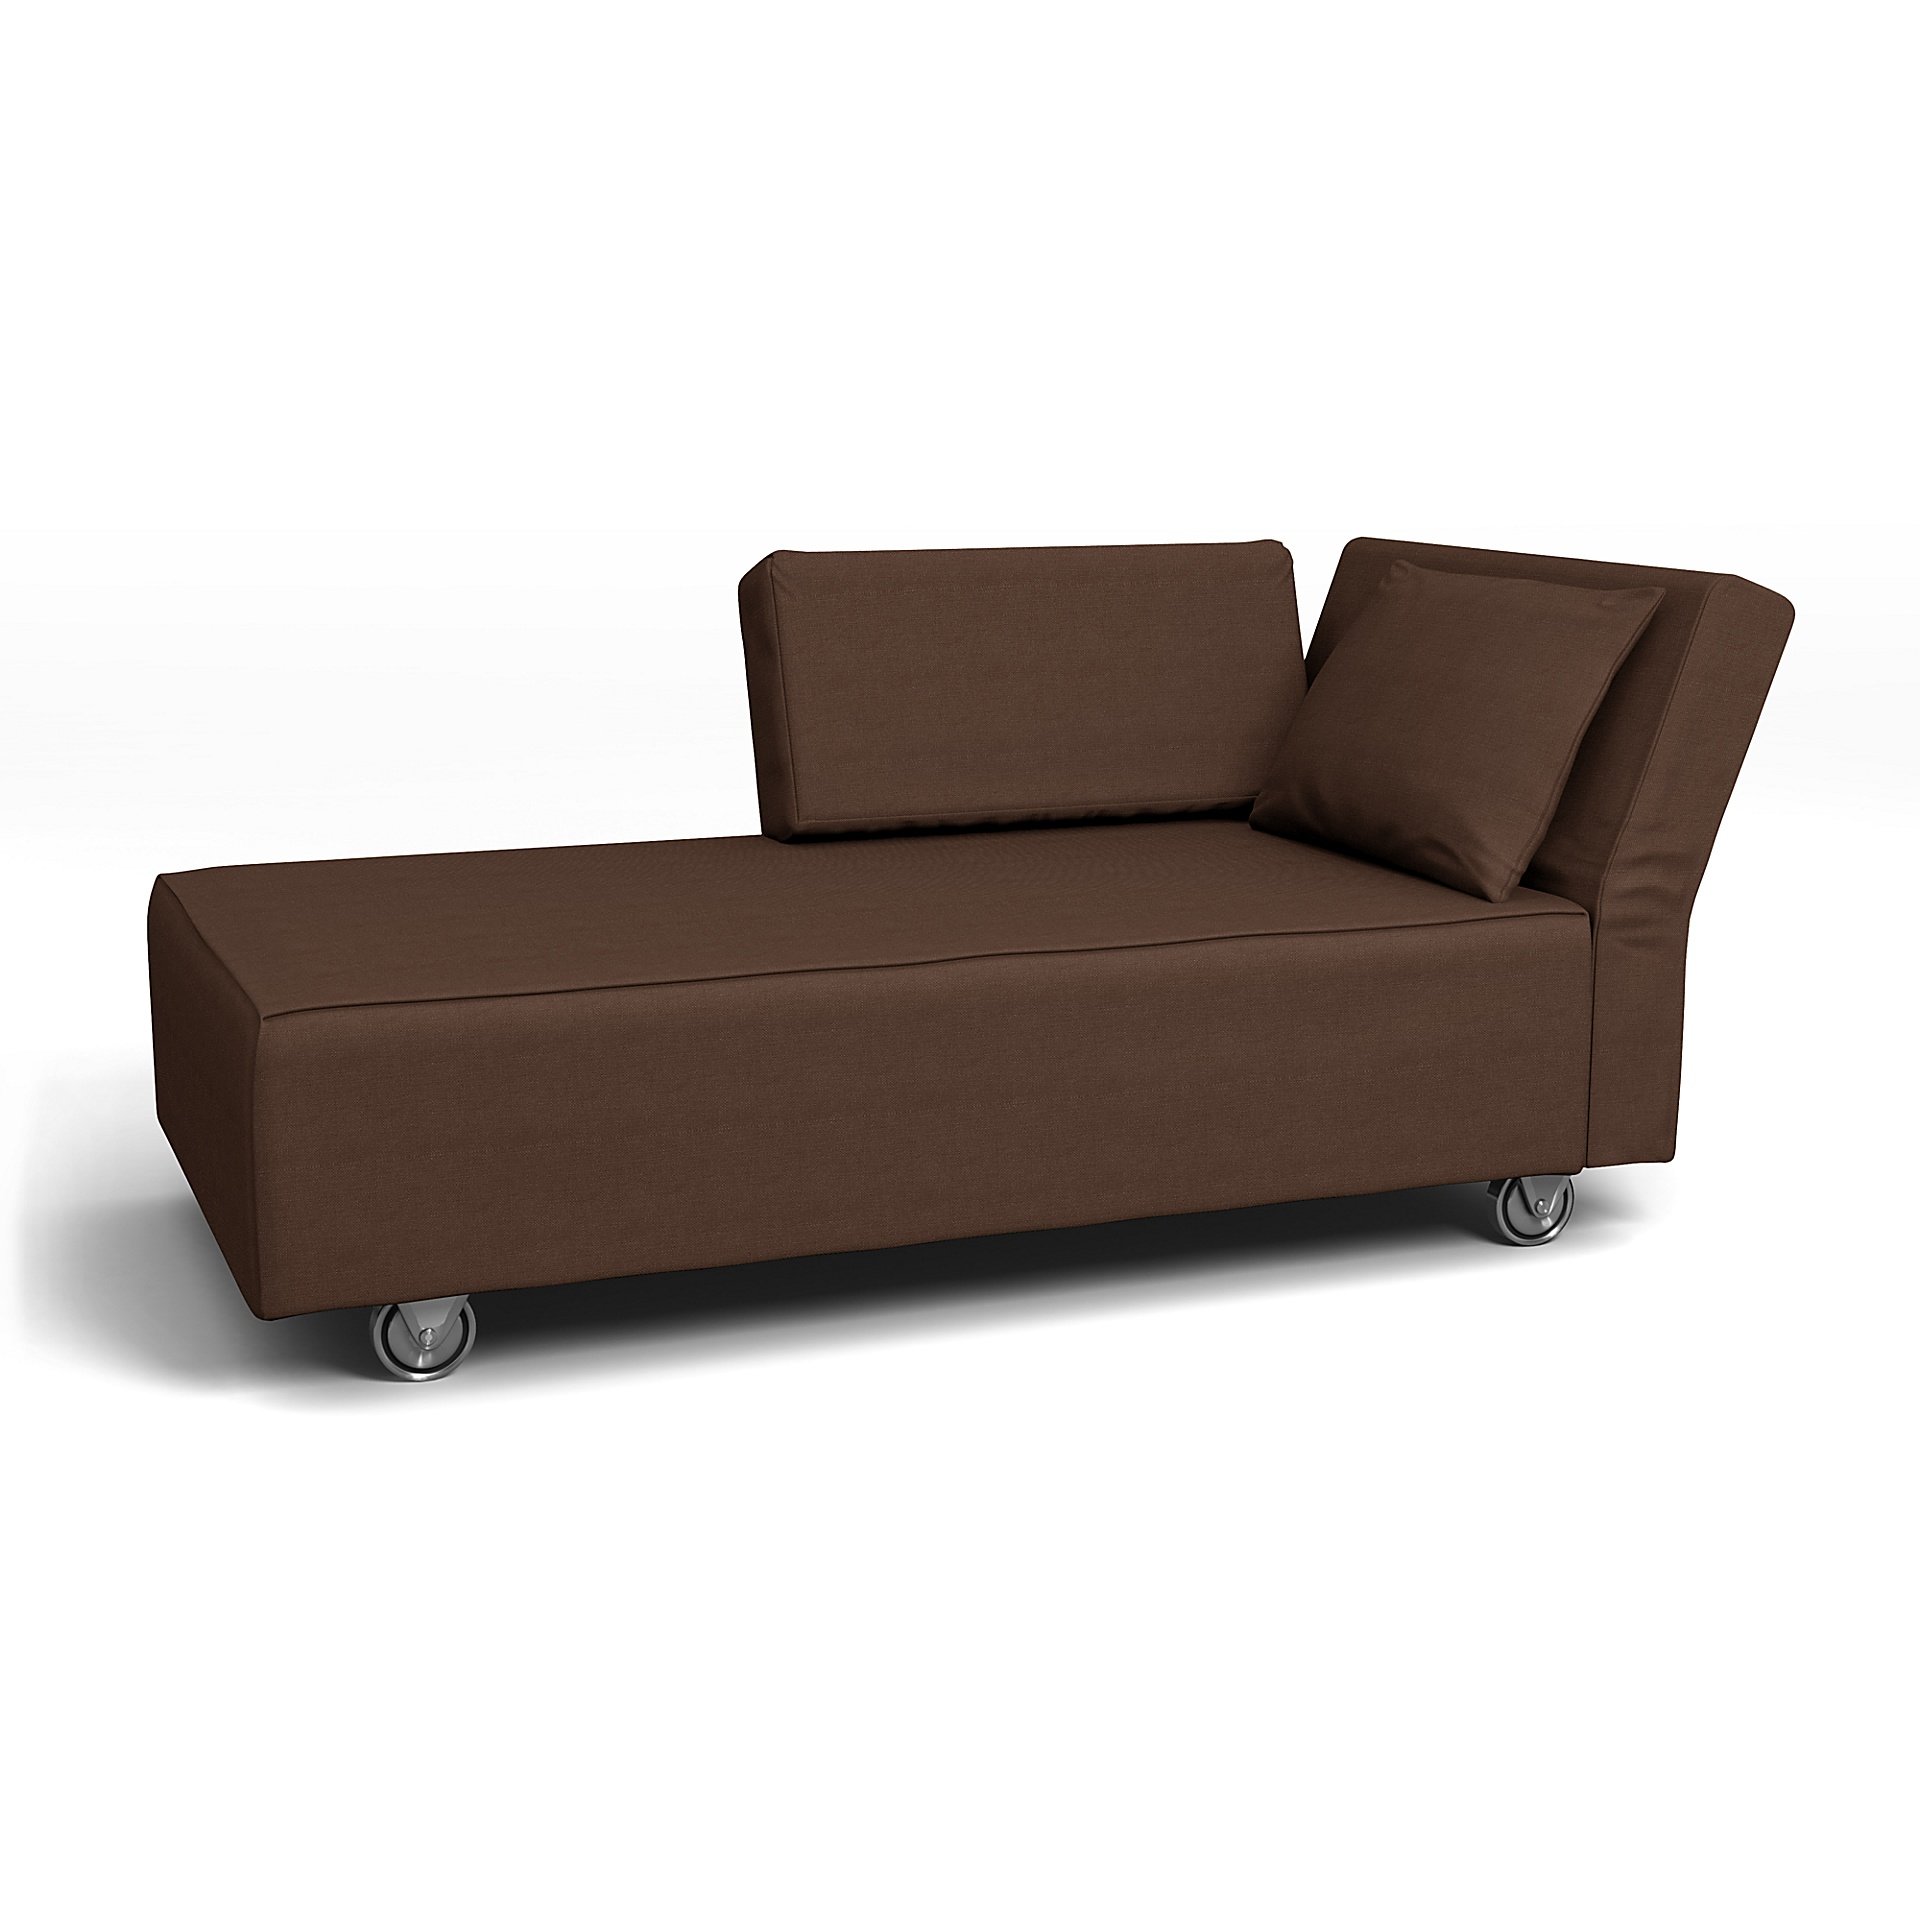 IKEA - Falsterbo Chaise with Right Armrest Cover, Chocolate, Linen - Bemz